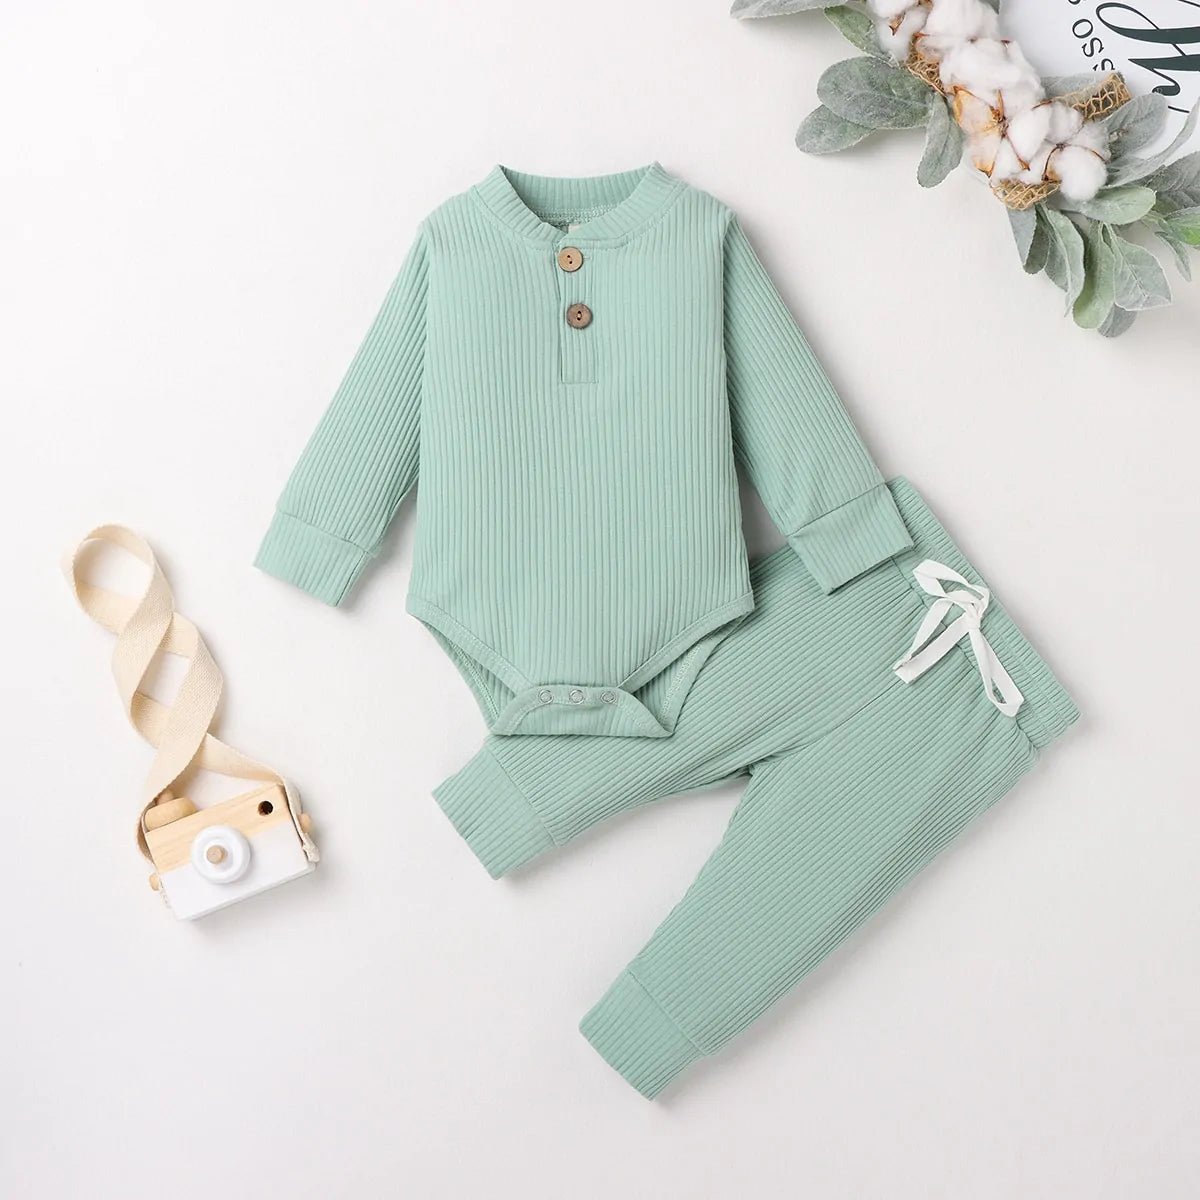 Baby Knit Autumn Clothes